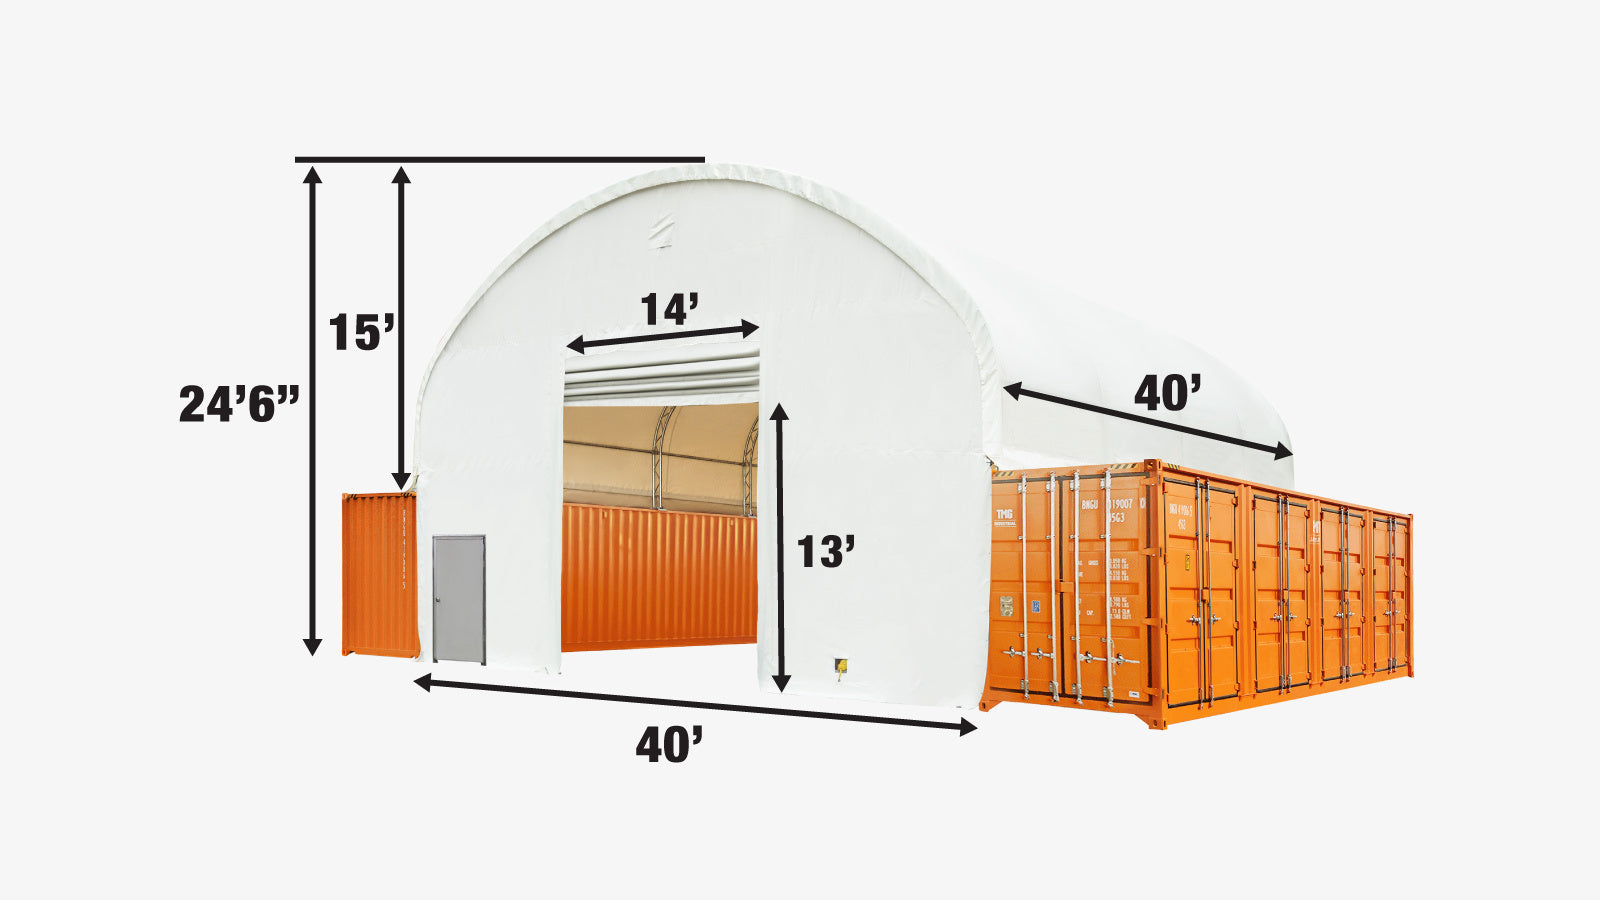 TMG Industrial 40' x 40' Dual Truss Container Shelter with Heavy Duty 21 oz PVC Cover, Fully Enclosed front and back endwalls, TMG-DT4041CG-specifications-image